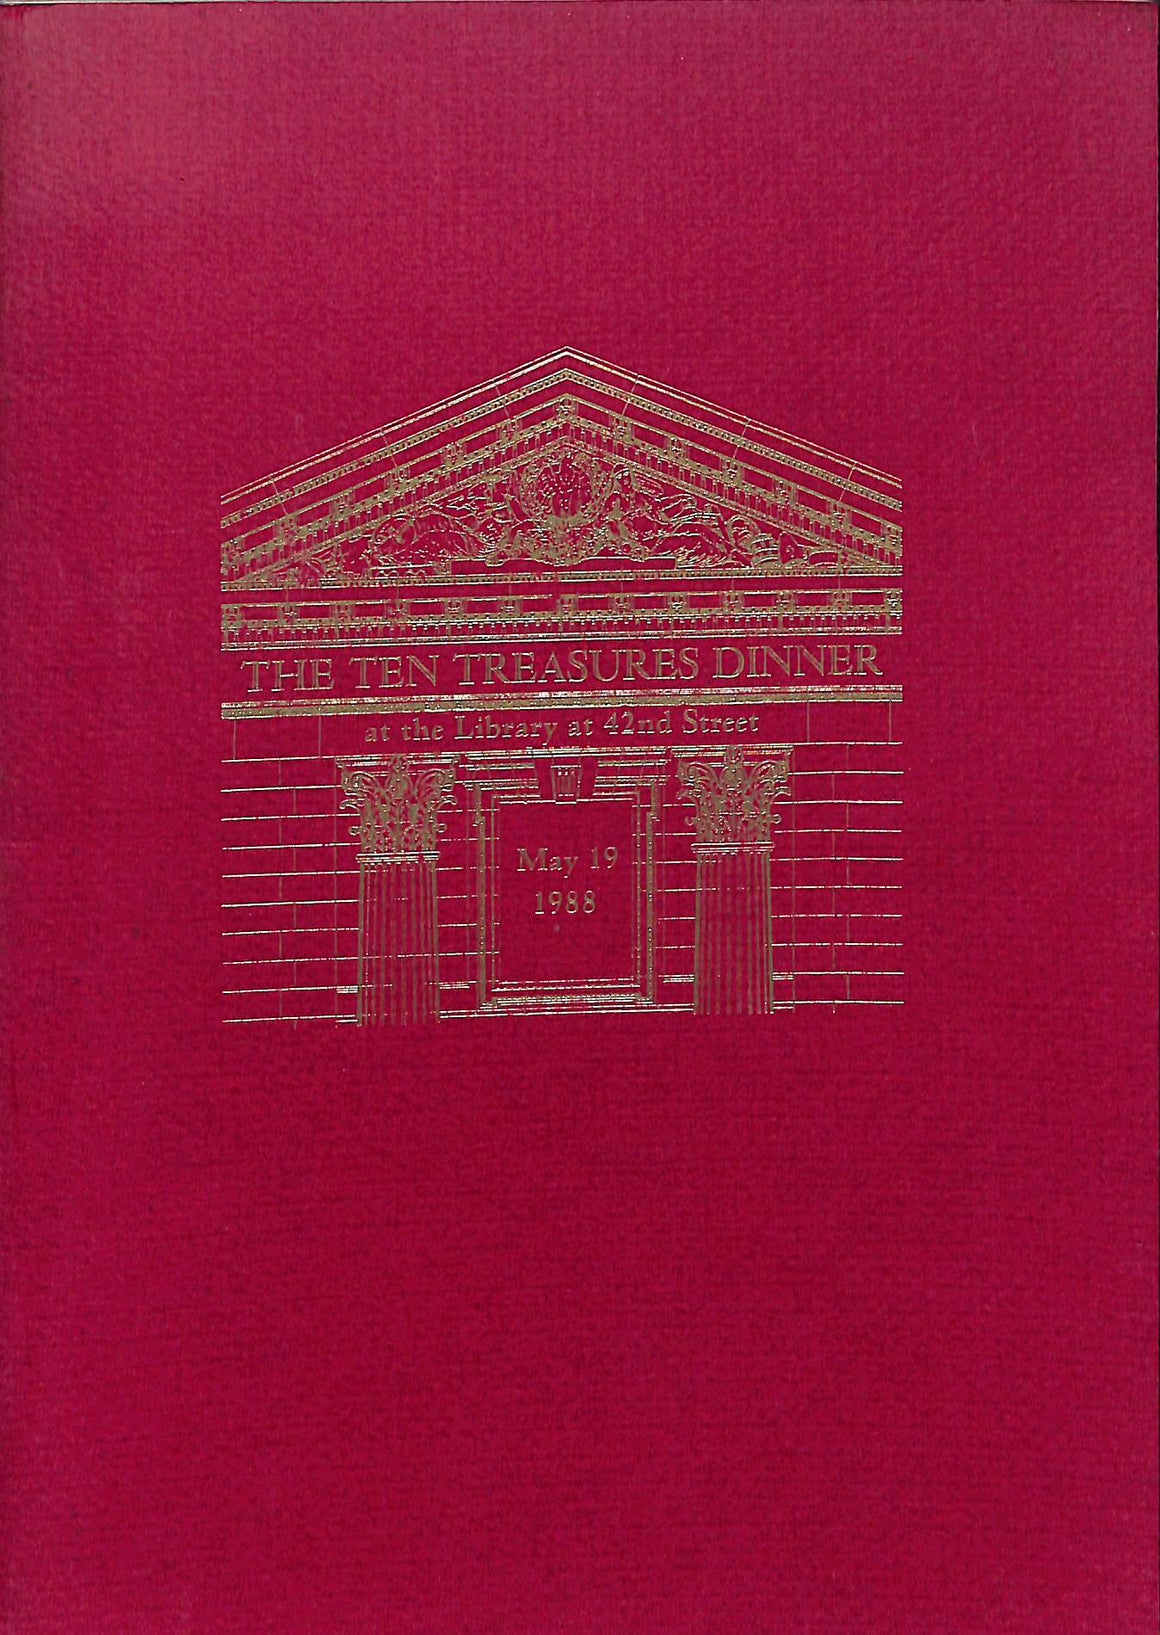 The New York Public Library: The Ten Treasures Dinner: May 19, 1988